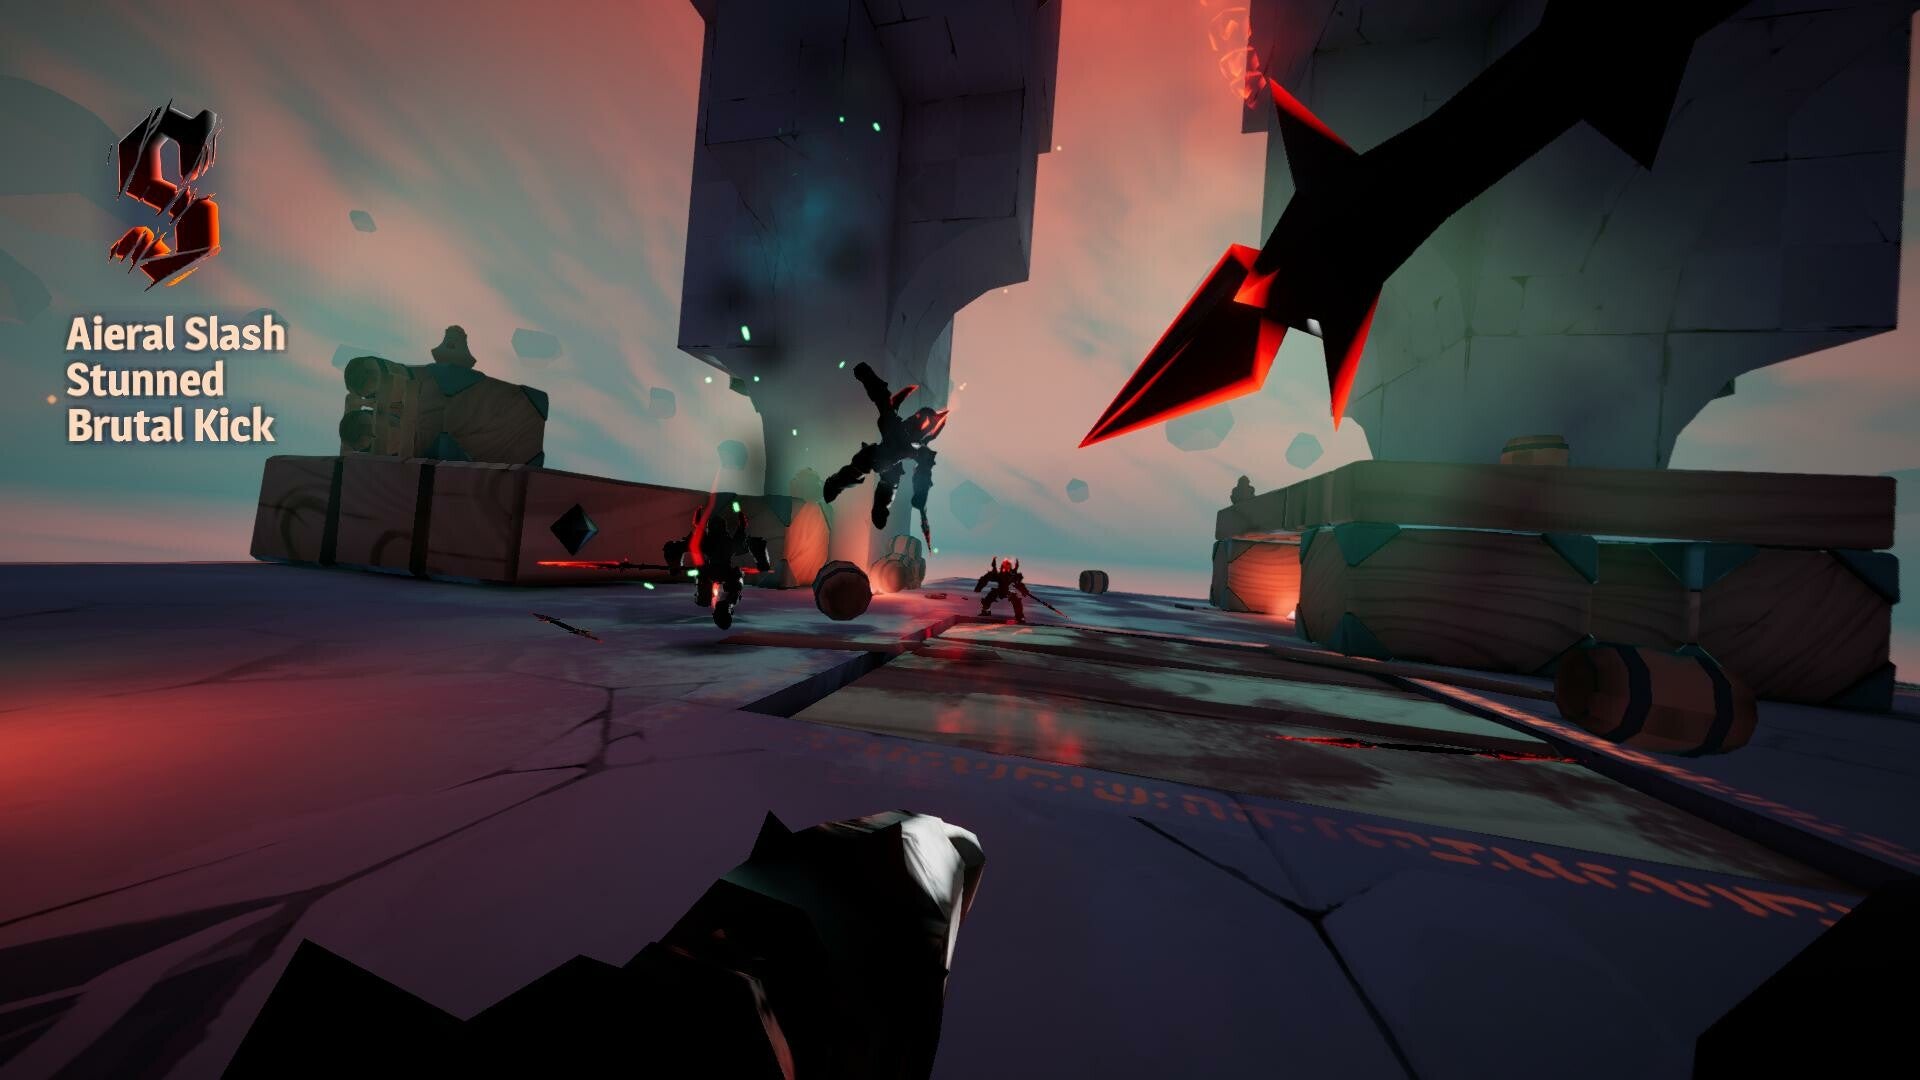 Armoured enemies leap toward the player in the abstract hellscape of Shady Knight